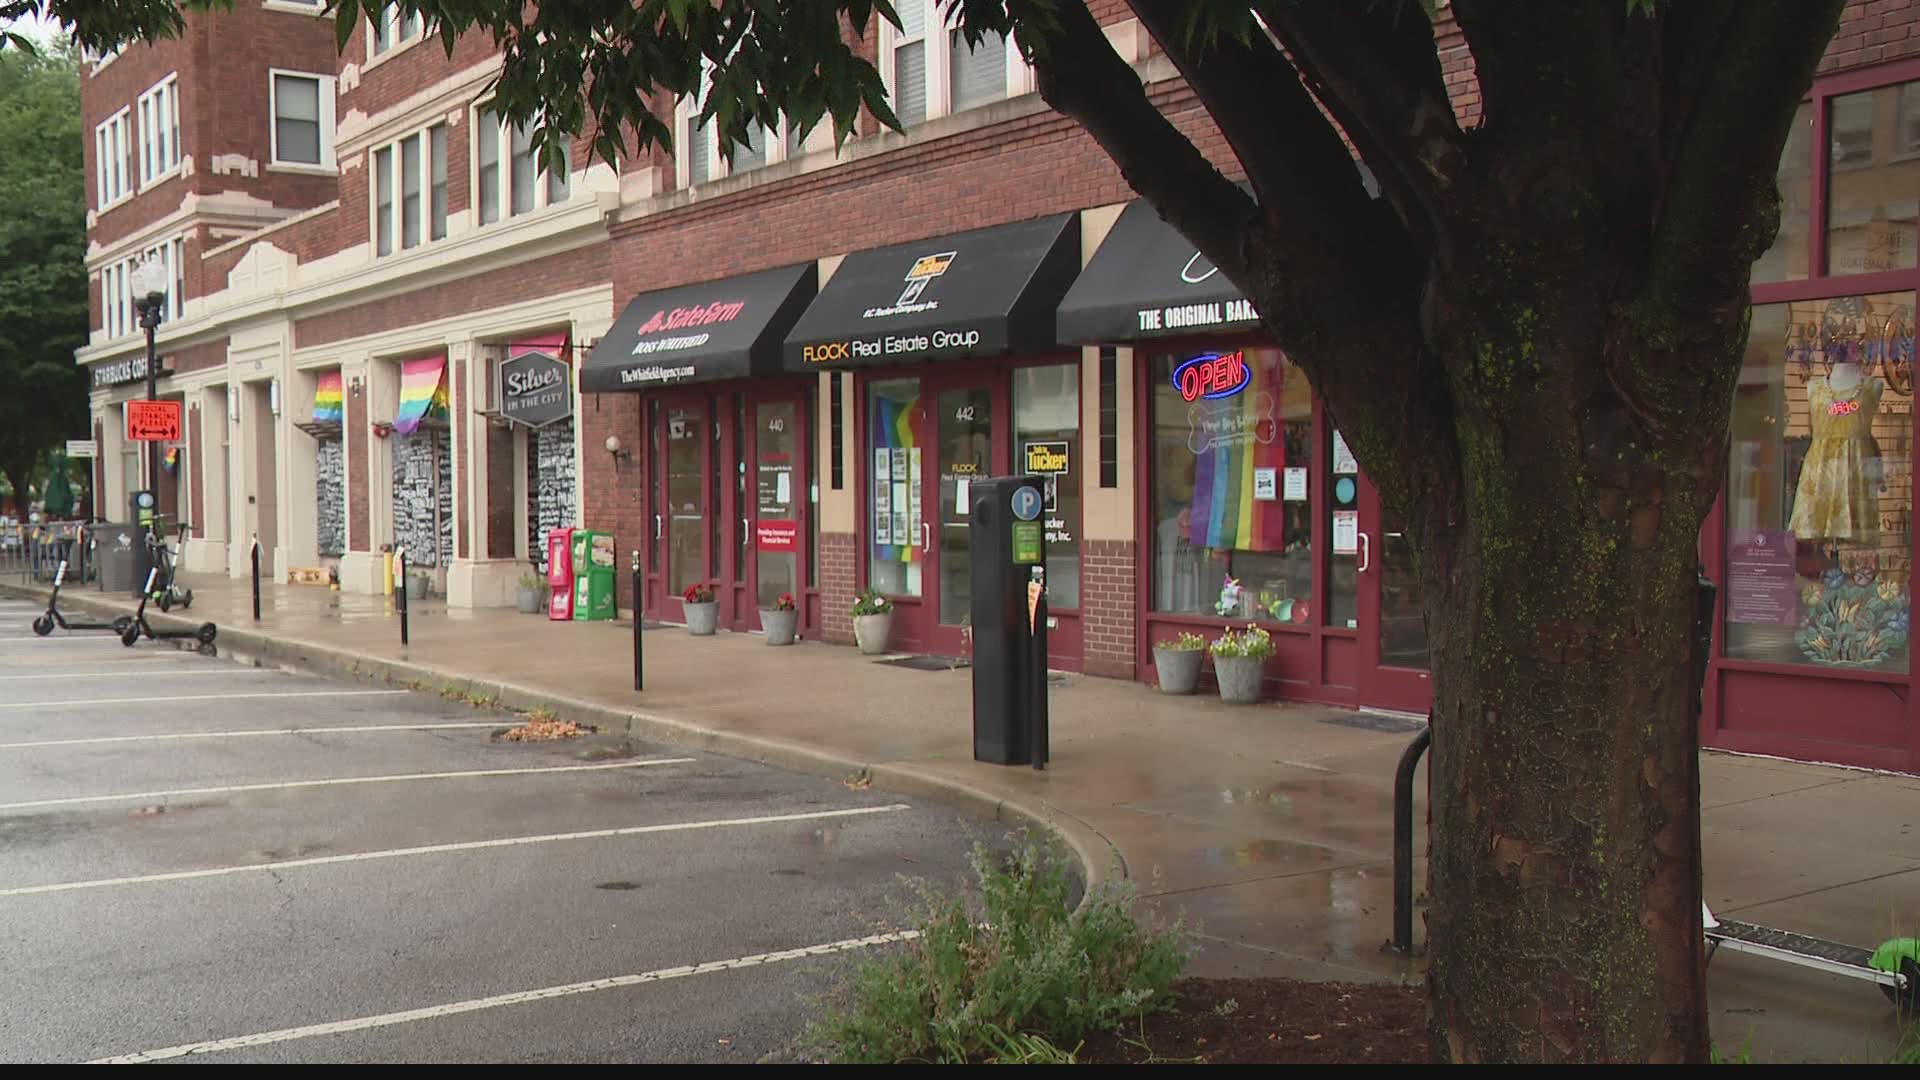 One month after some rioters damaged downtown businesses, the boards replacing broken windows are disappearing from downtown stores and restaurants.